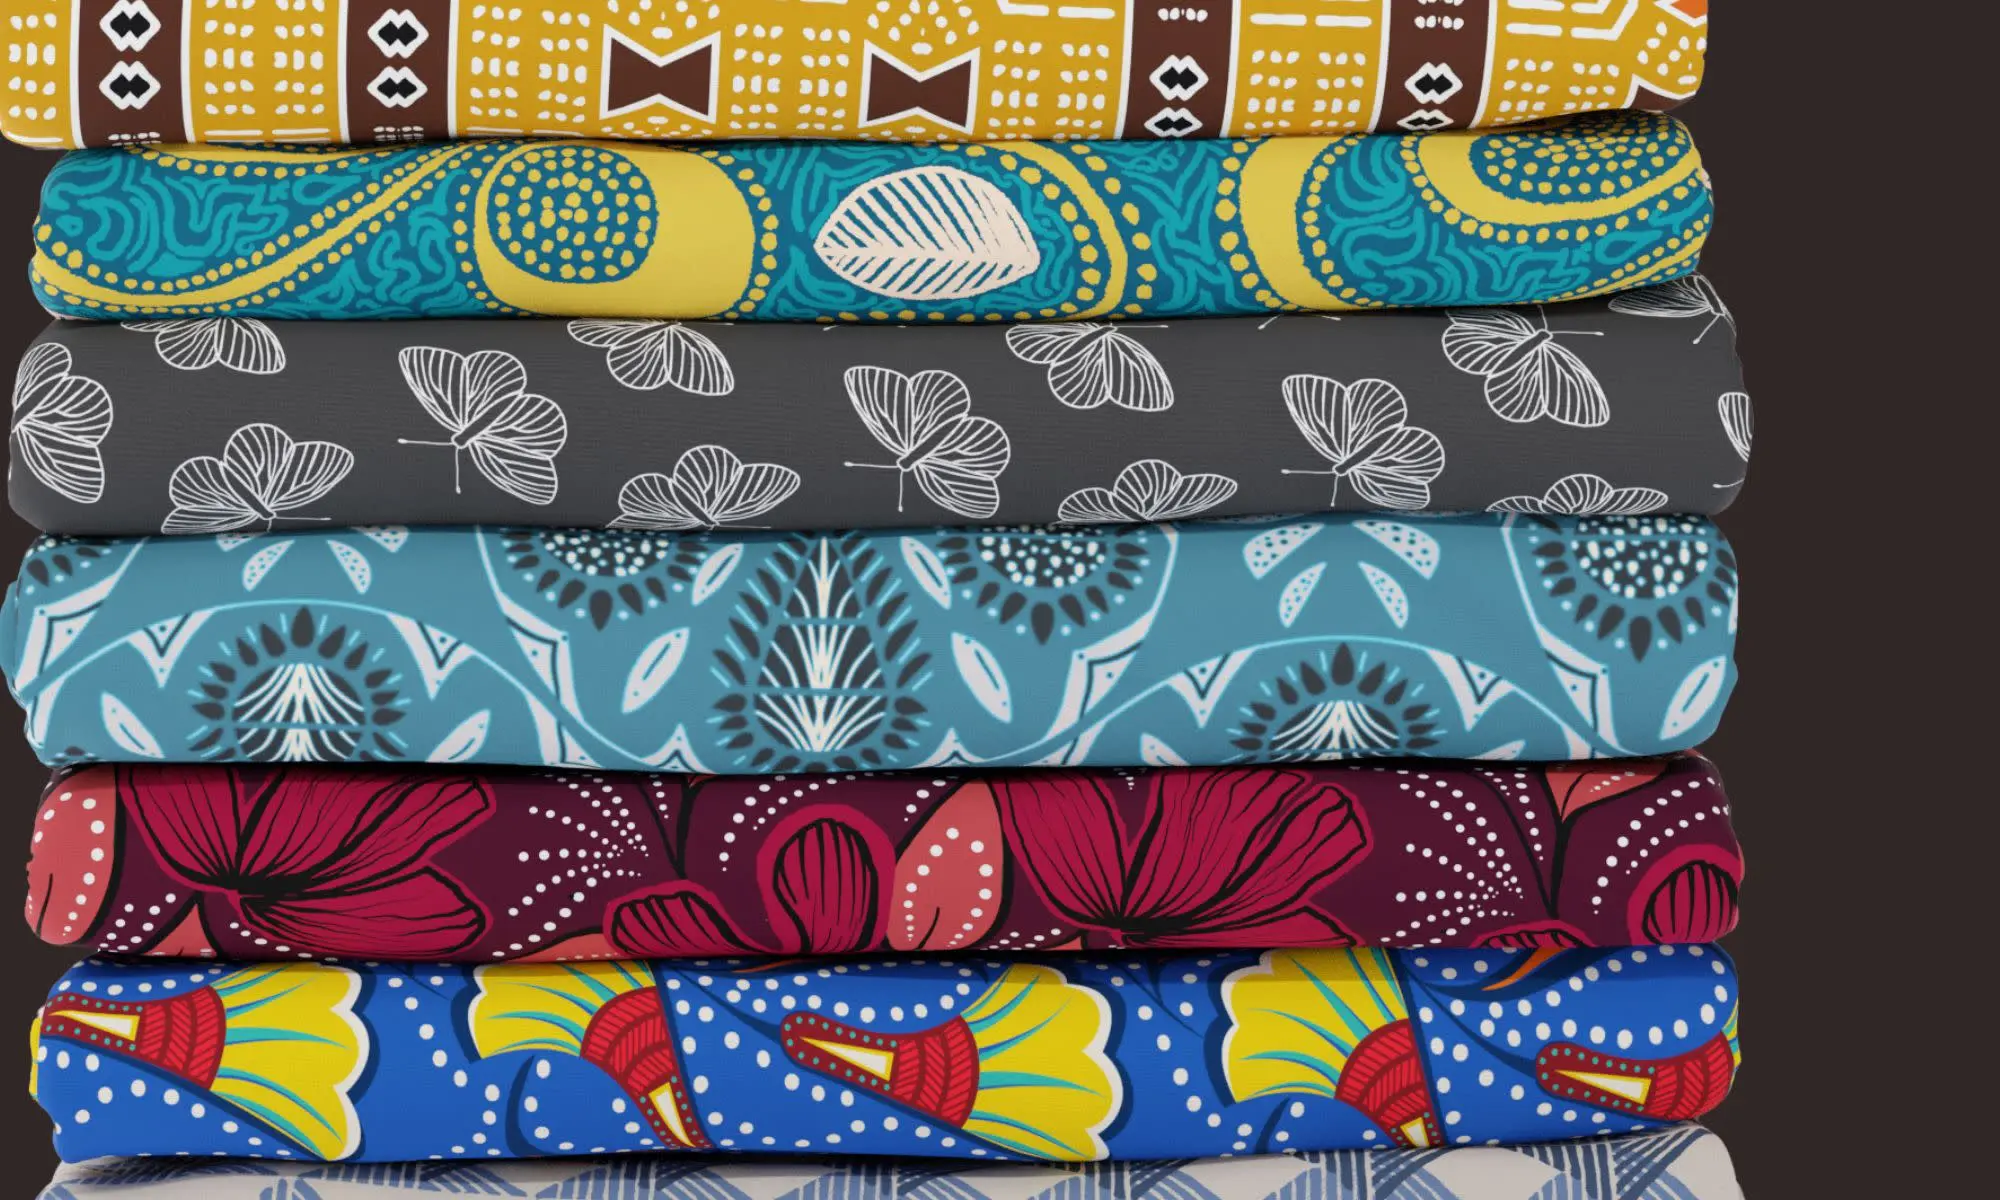 Stack of colorful fabrics on black background